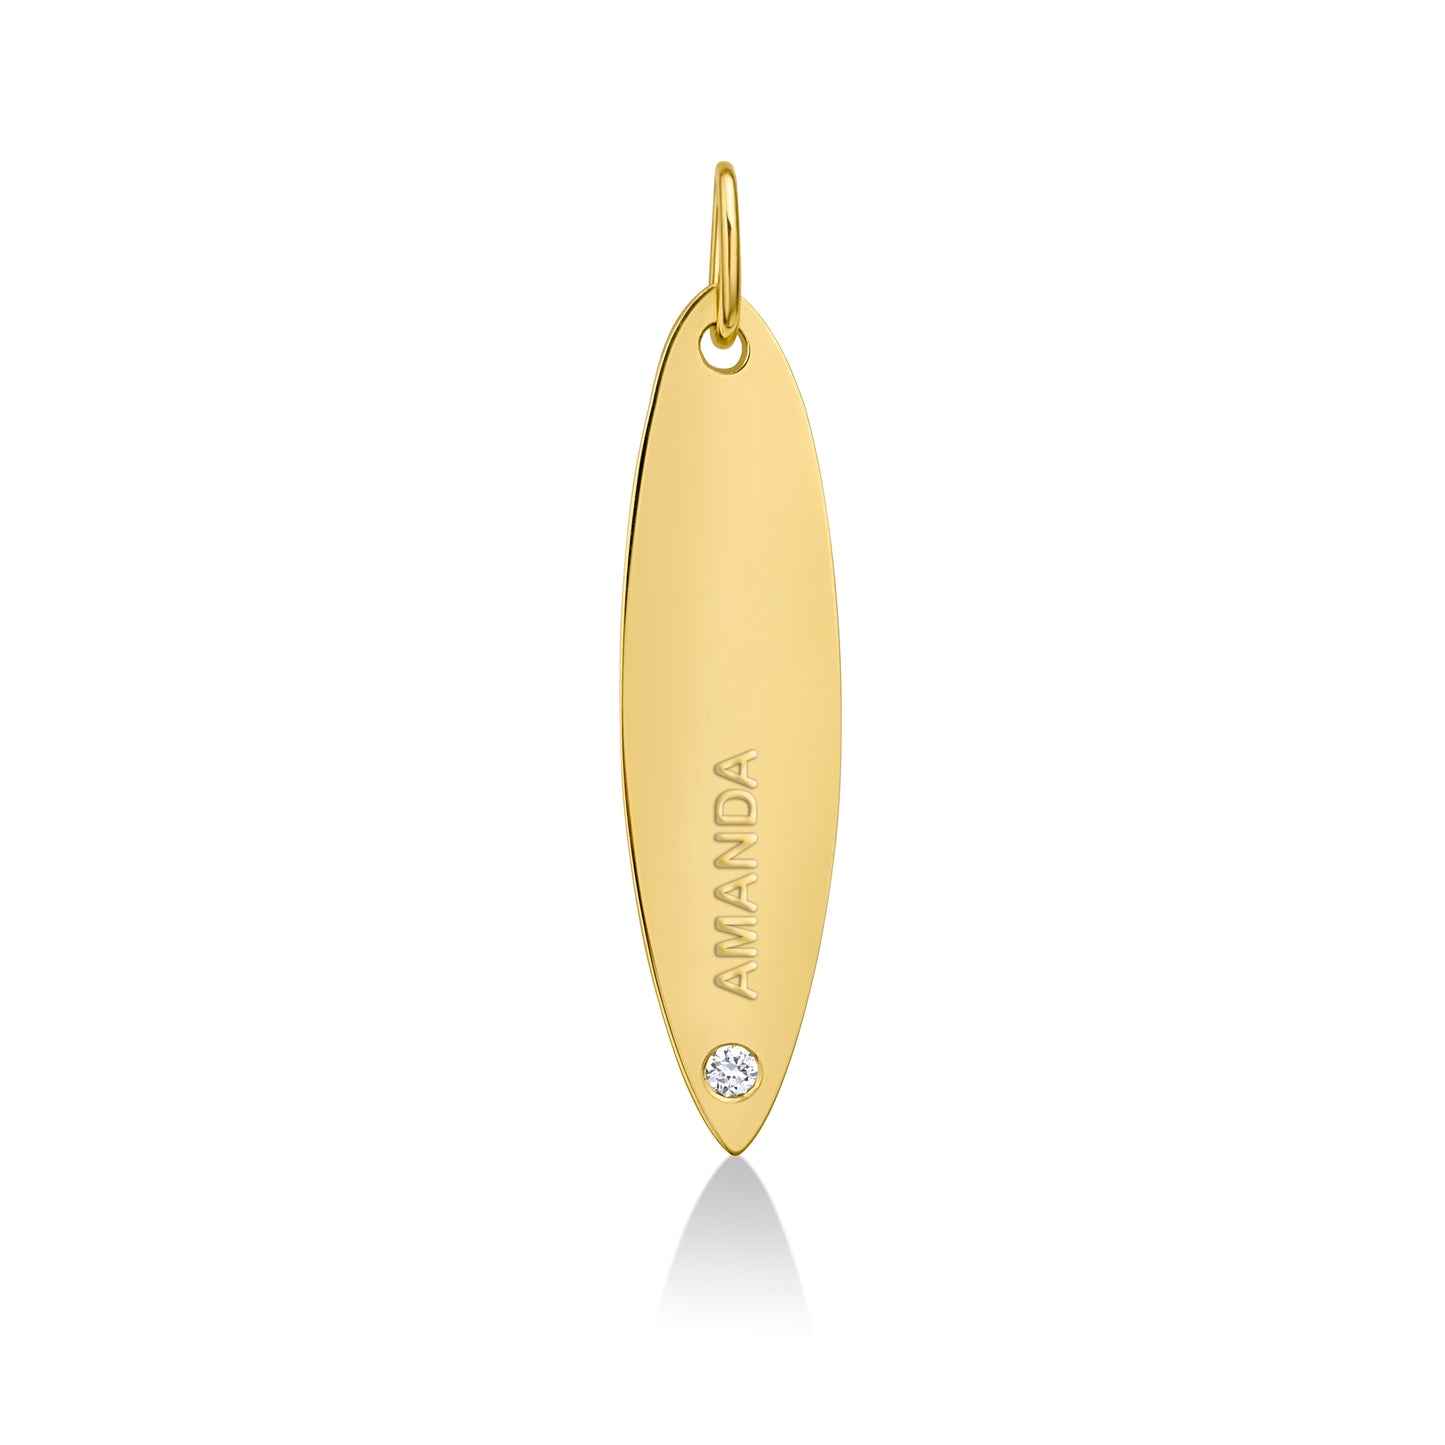 14k gold surfboard charm lock with AMANDA engraved and diamond